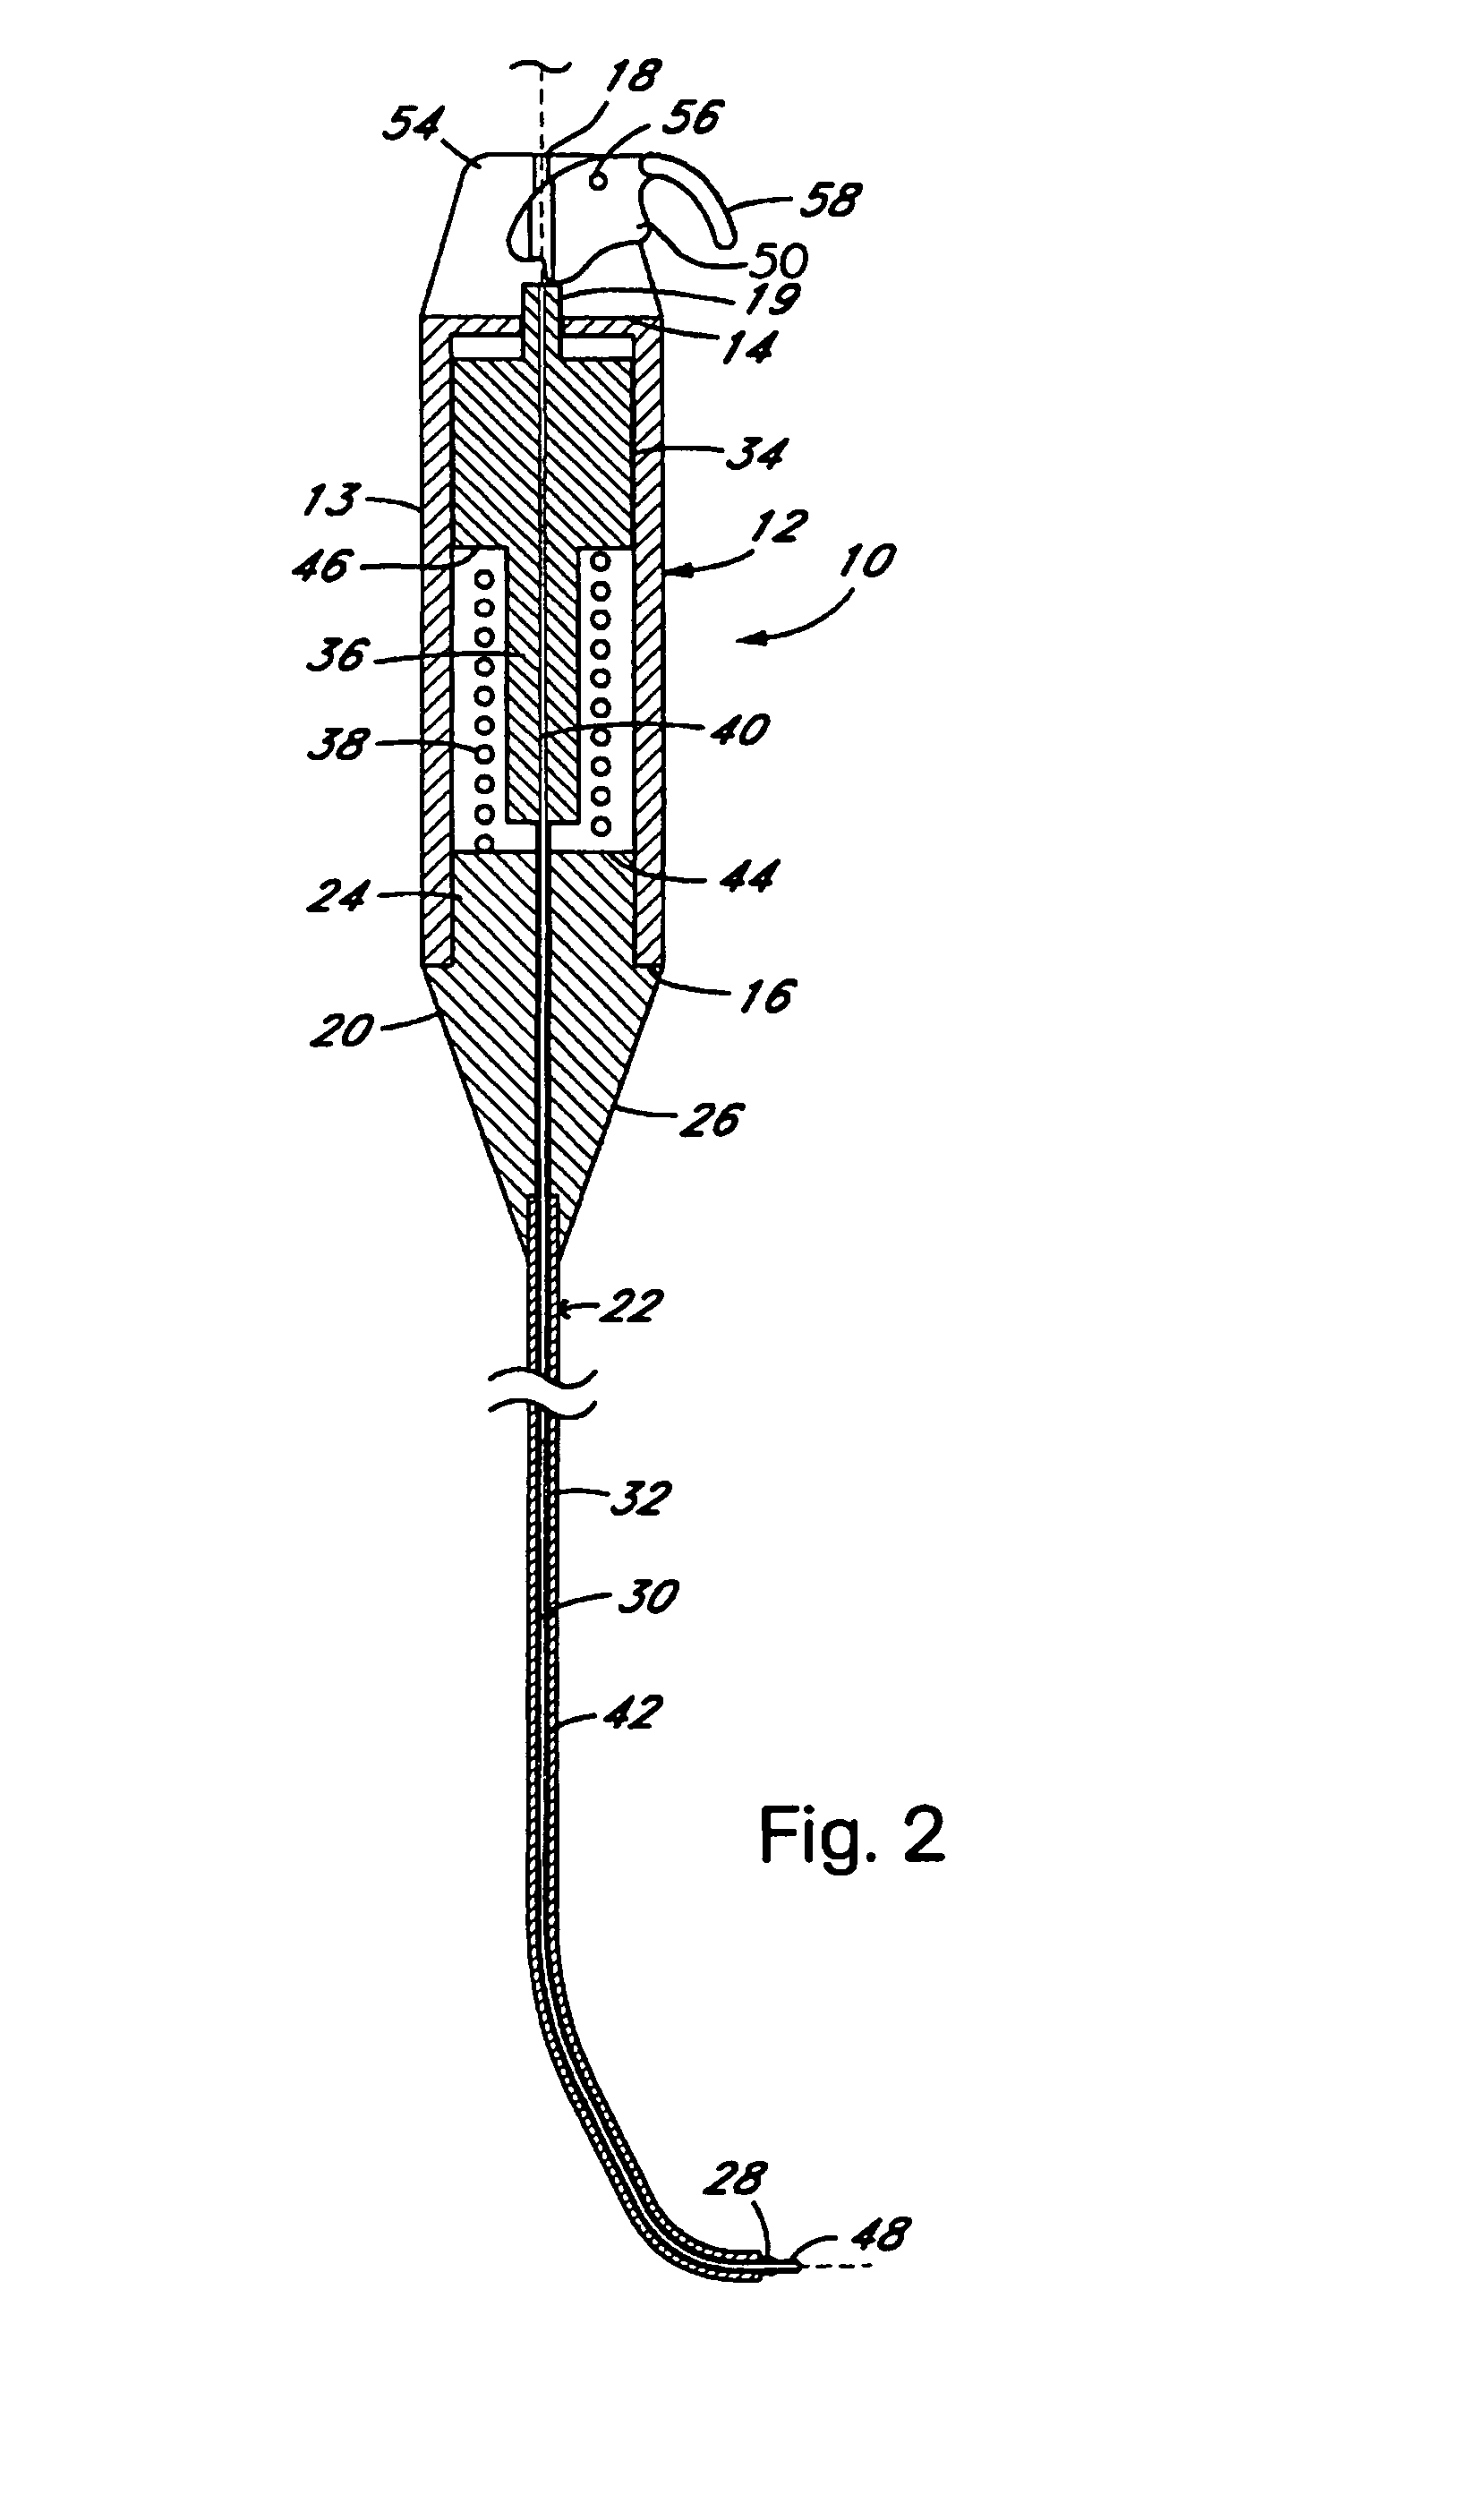 Systems, devices, and methods for minimally invasive pelvic surgery